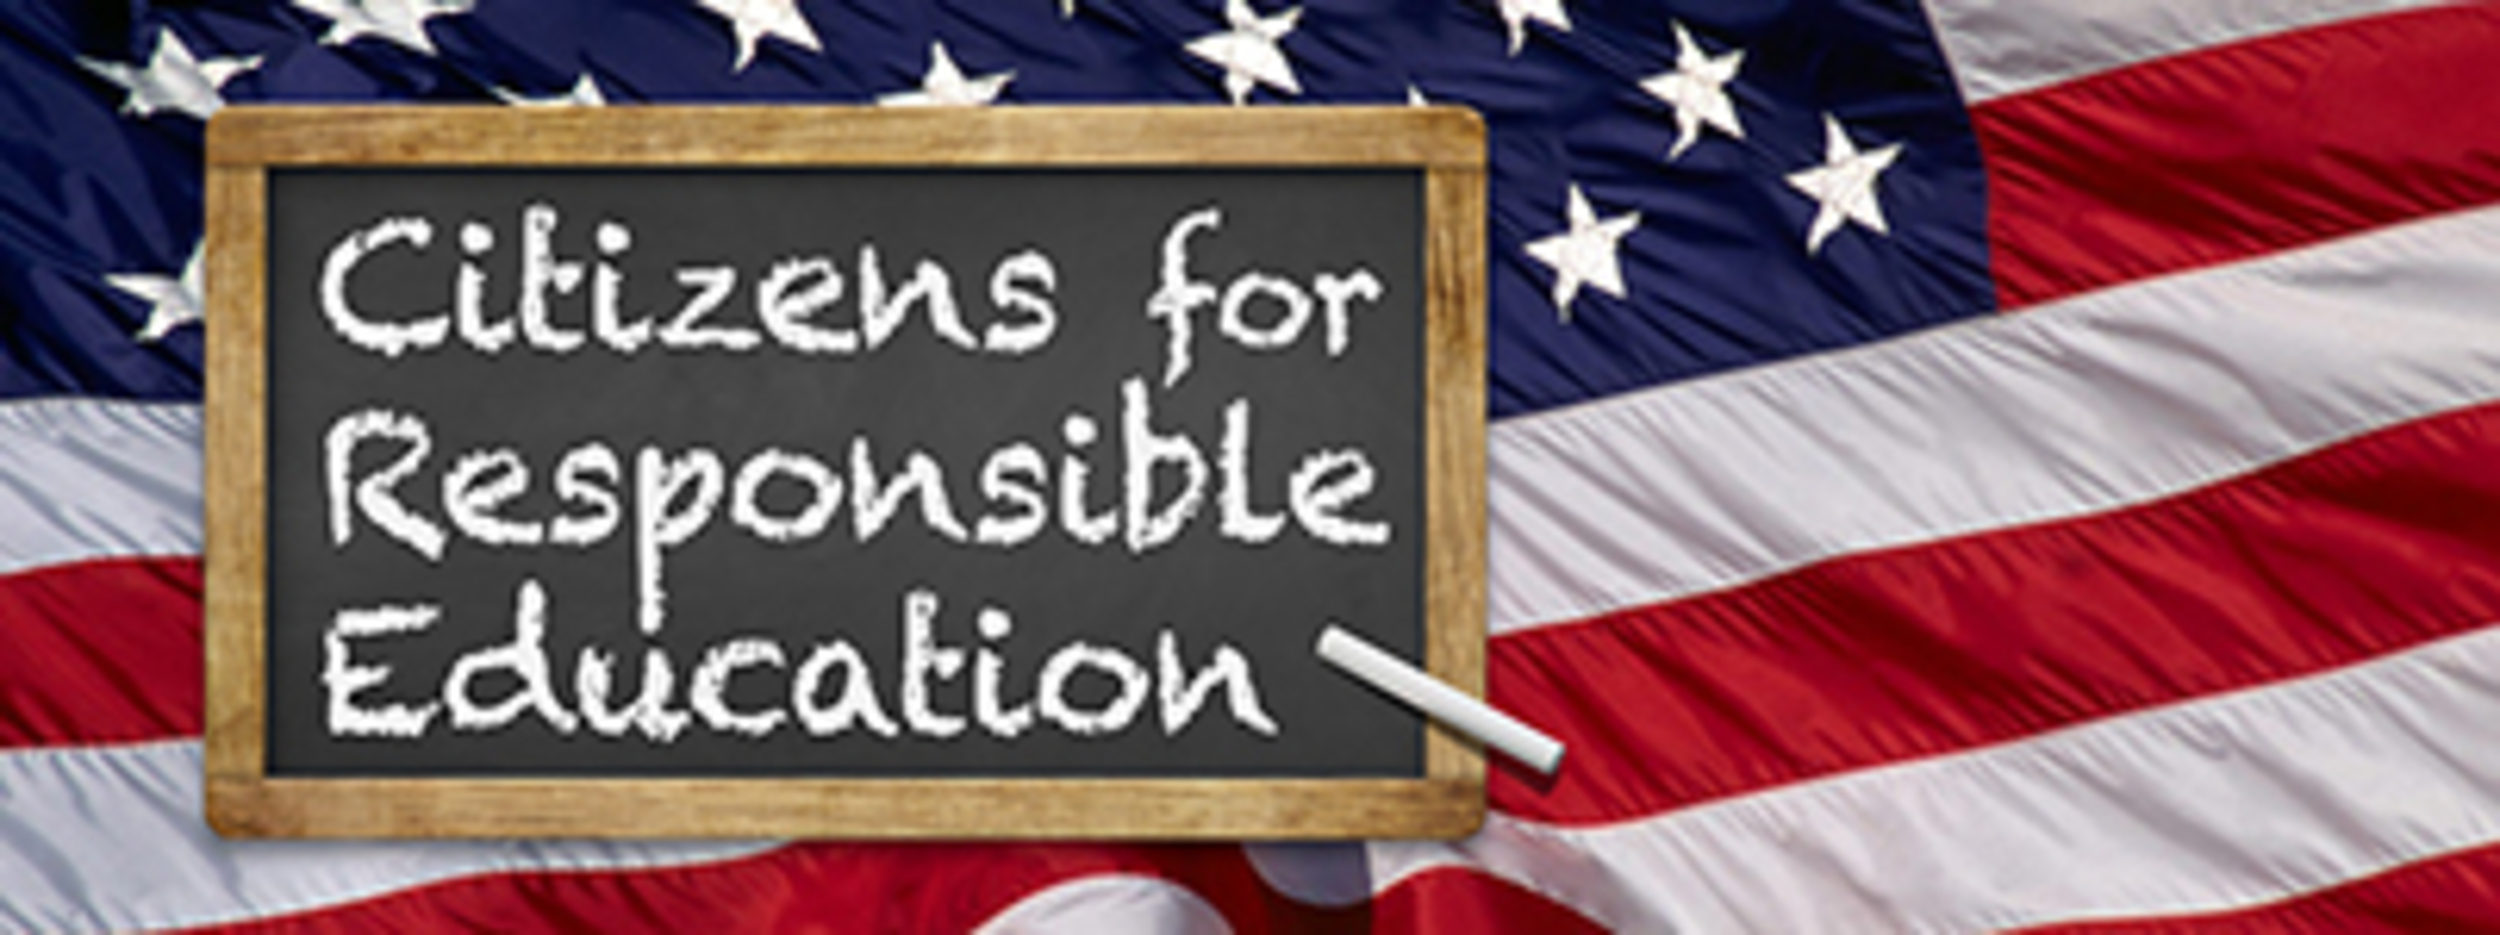 Citizens for Responsible Education